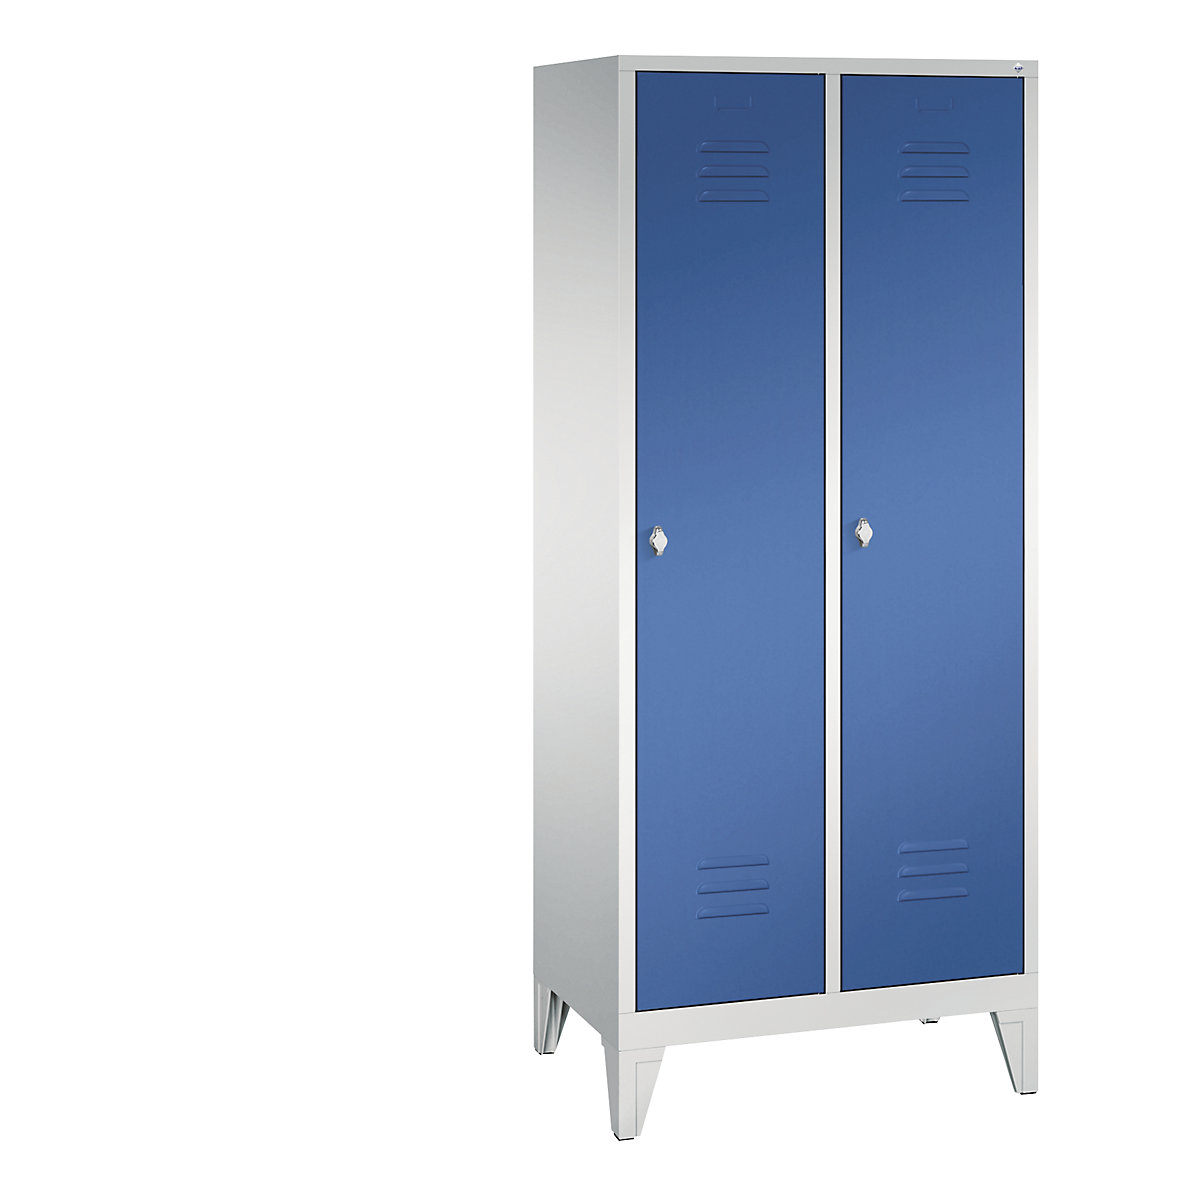 CLASSIC cloakroom locker with feet – C+P, 2 compartments, compartment width 400 mm, light grey / gentian blue-10